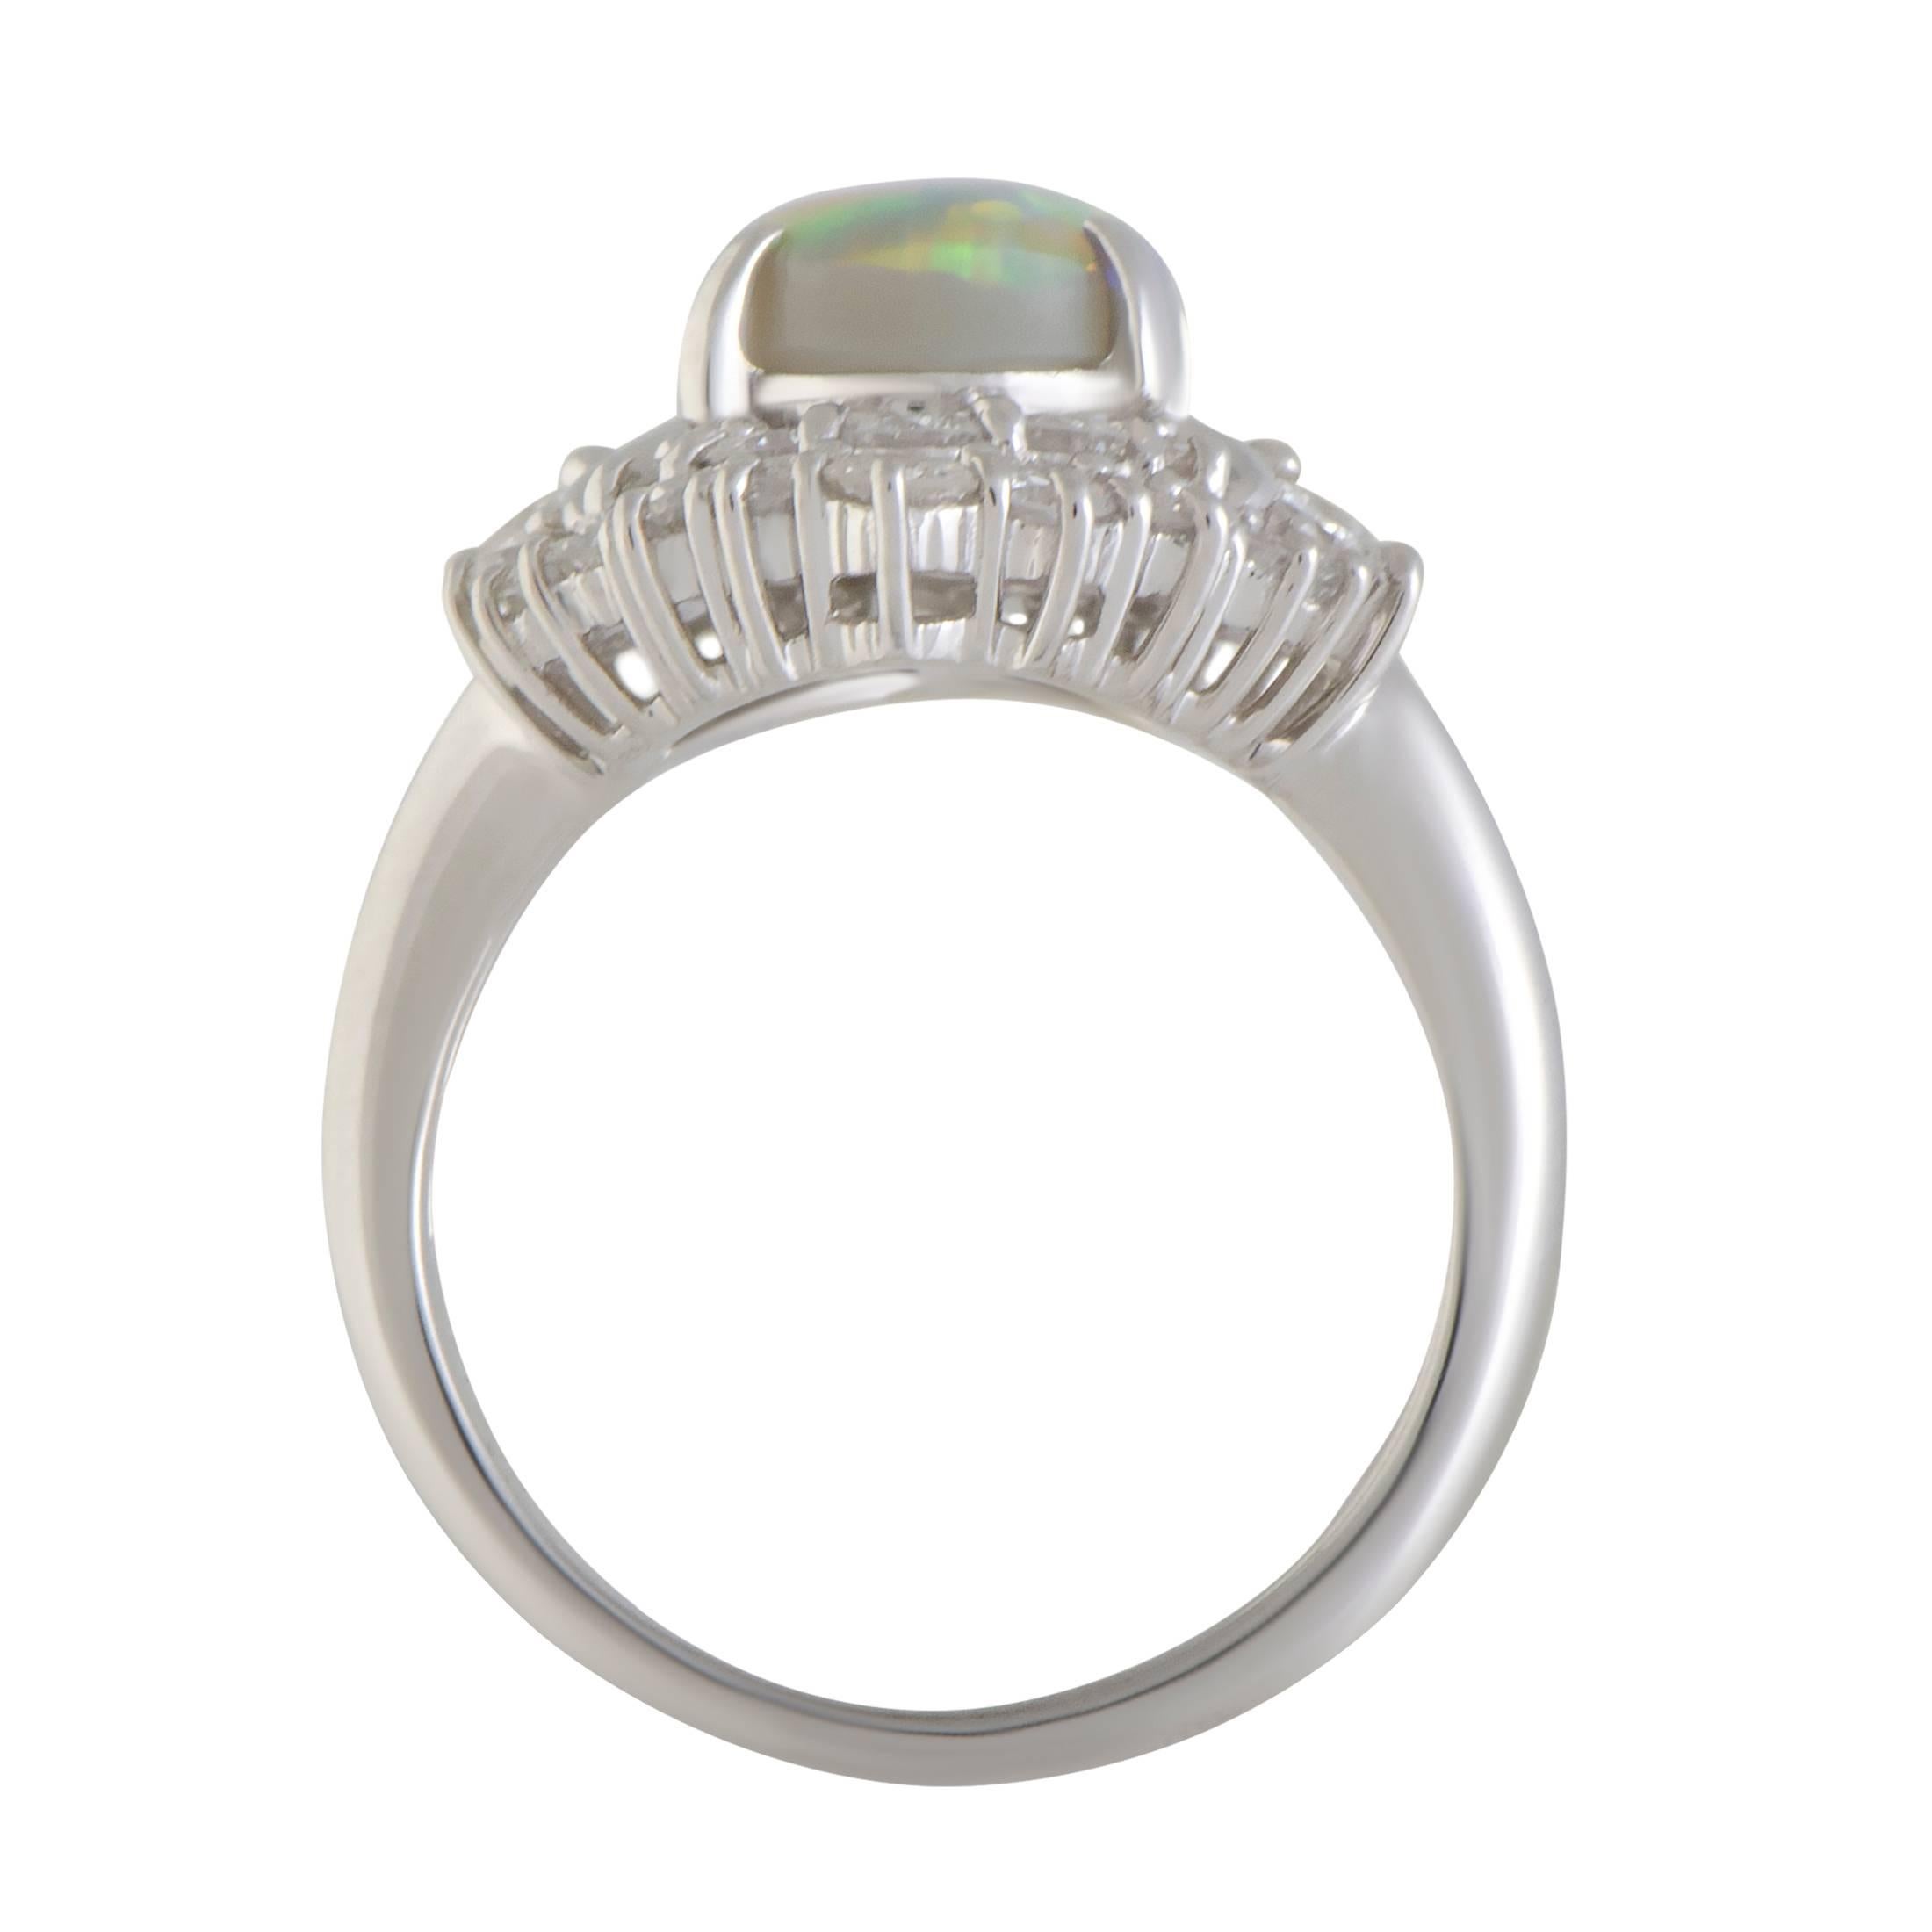 Featuring a gorgeously harmonious blend of platinum, diamonds and opal, this ring offers a wonderfully tasteful, classy appearance. The opal weighs 1.23 carats and it is accompanied by 0.86 carats of diamonds.
Ring Size 5
Band 2mm
Top 7mm
Dimension